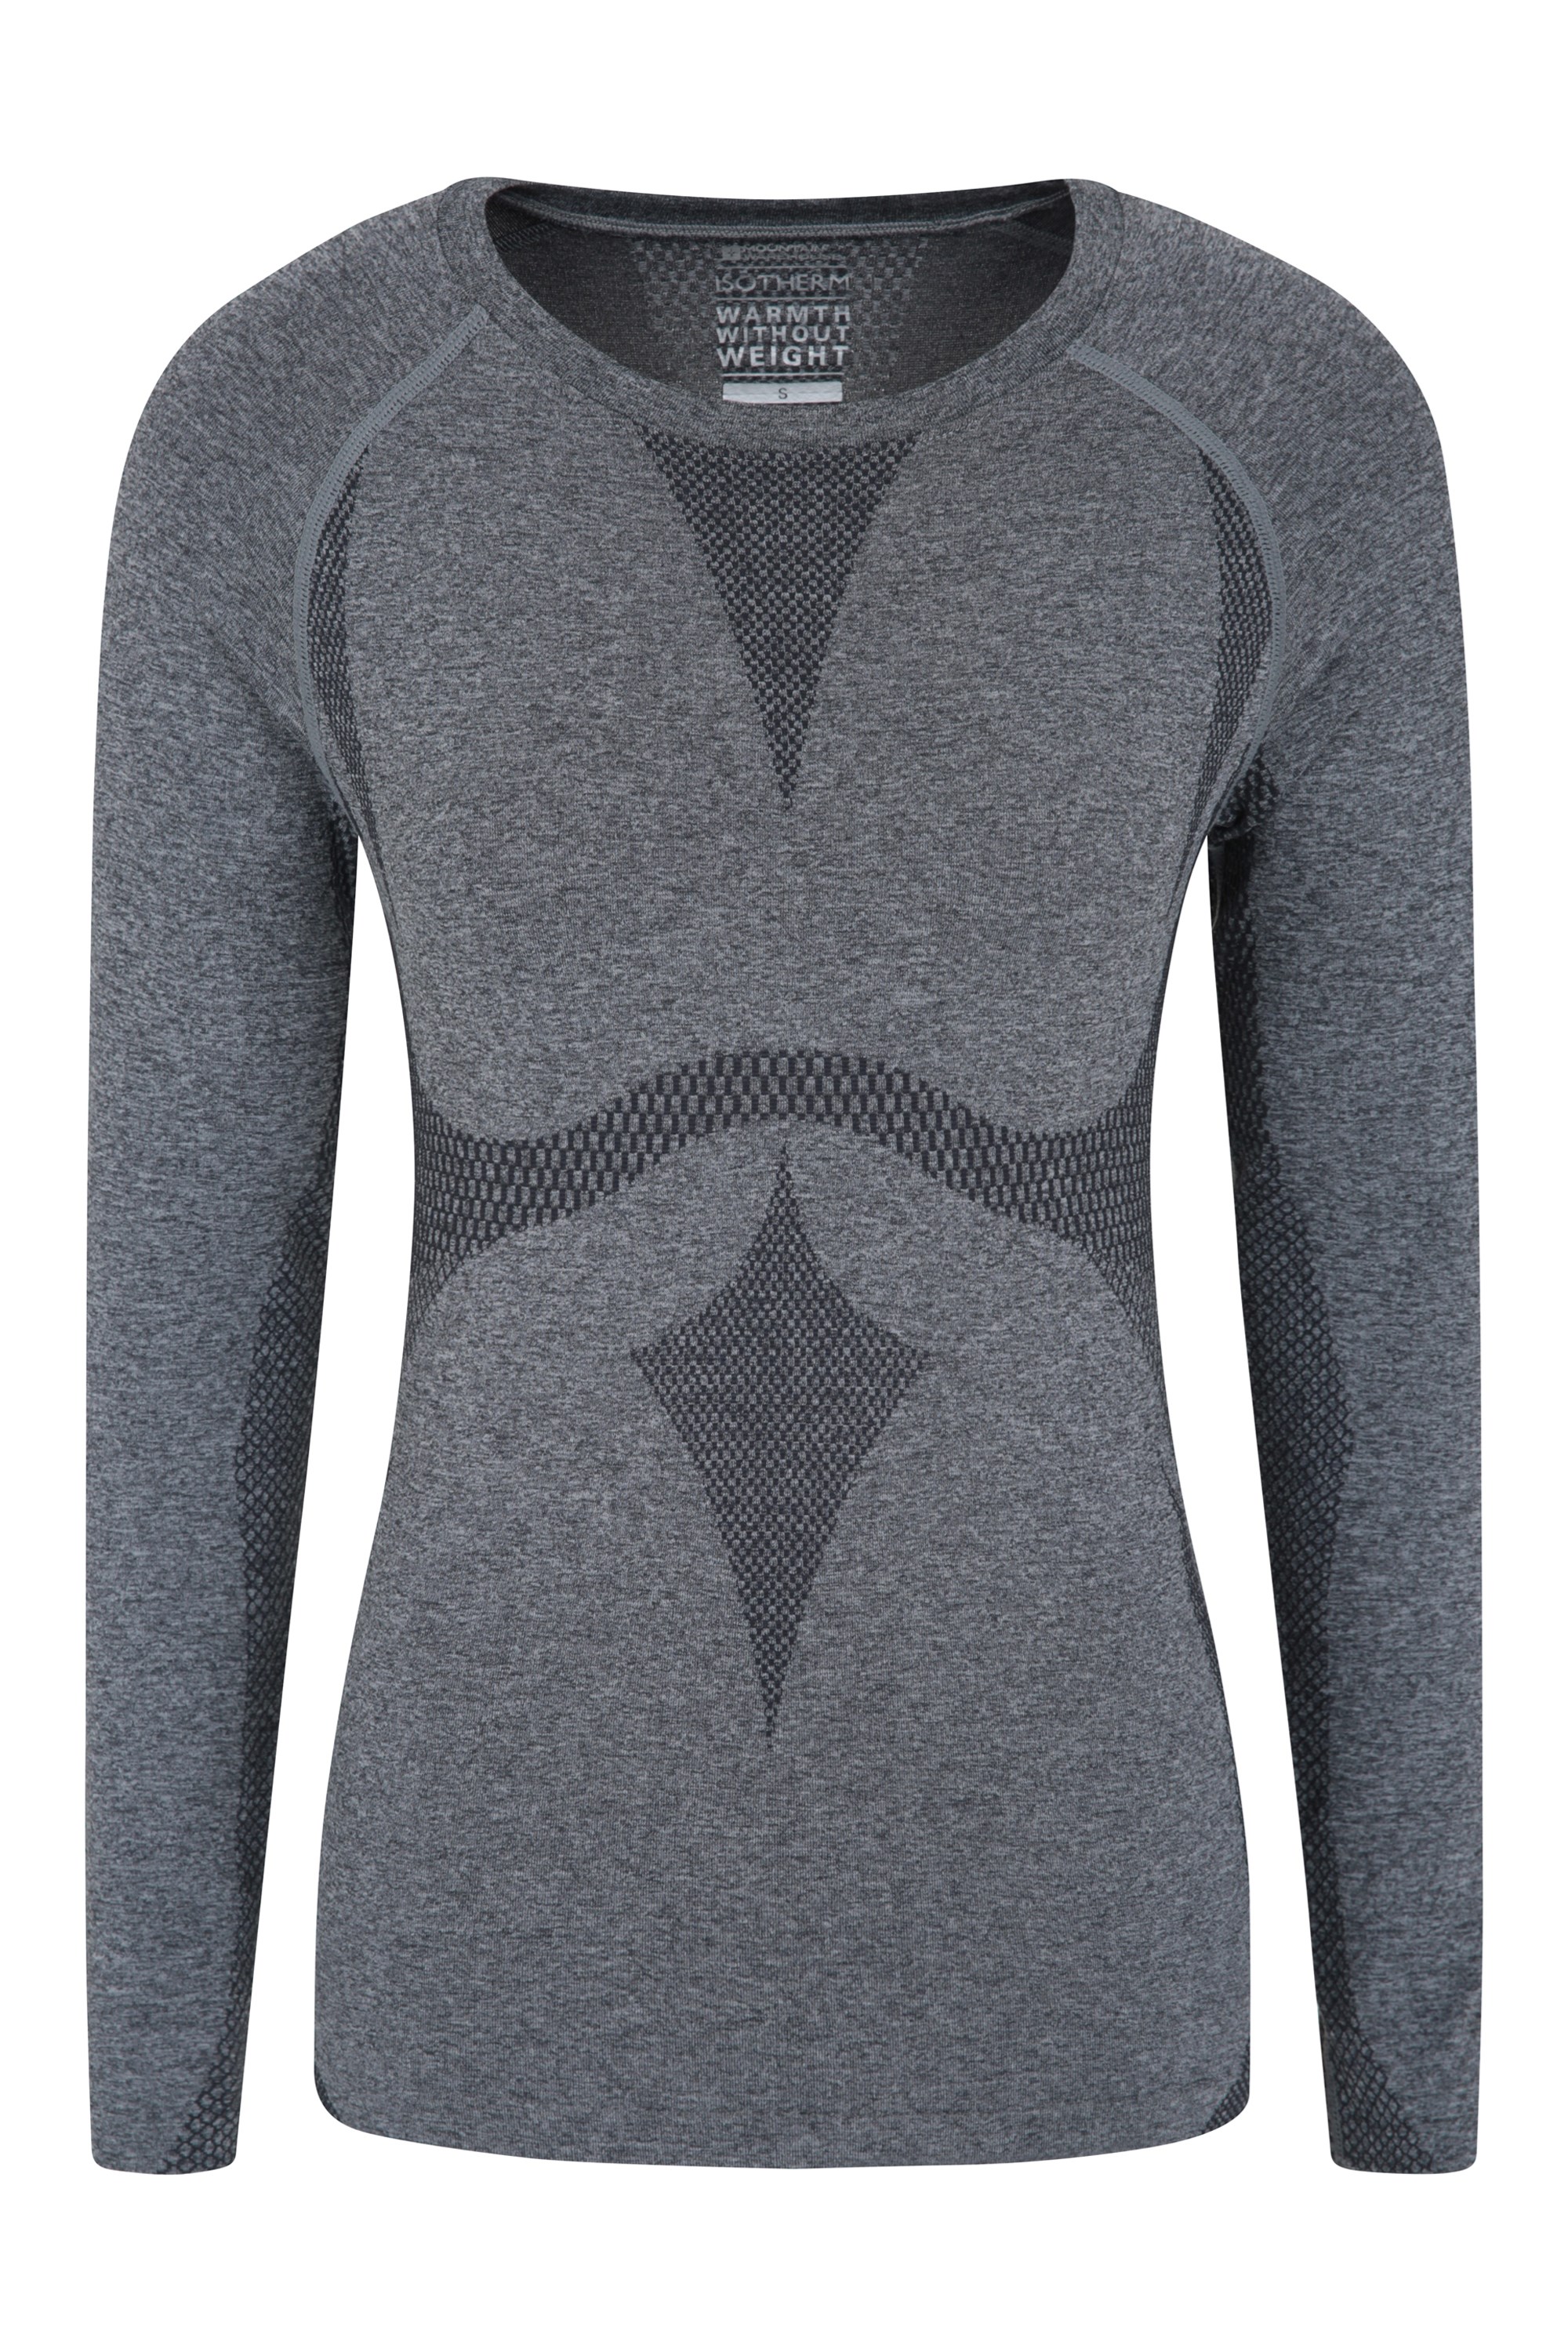 Quick Dry Best for Winter Breathable Marca: Mountain WarehouseMountain Warehouse off Piste Womens Seamless Top Lightweight Baselayer 